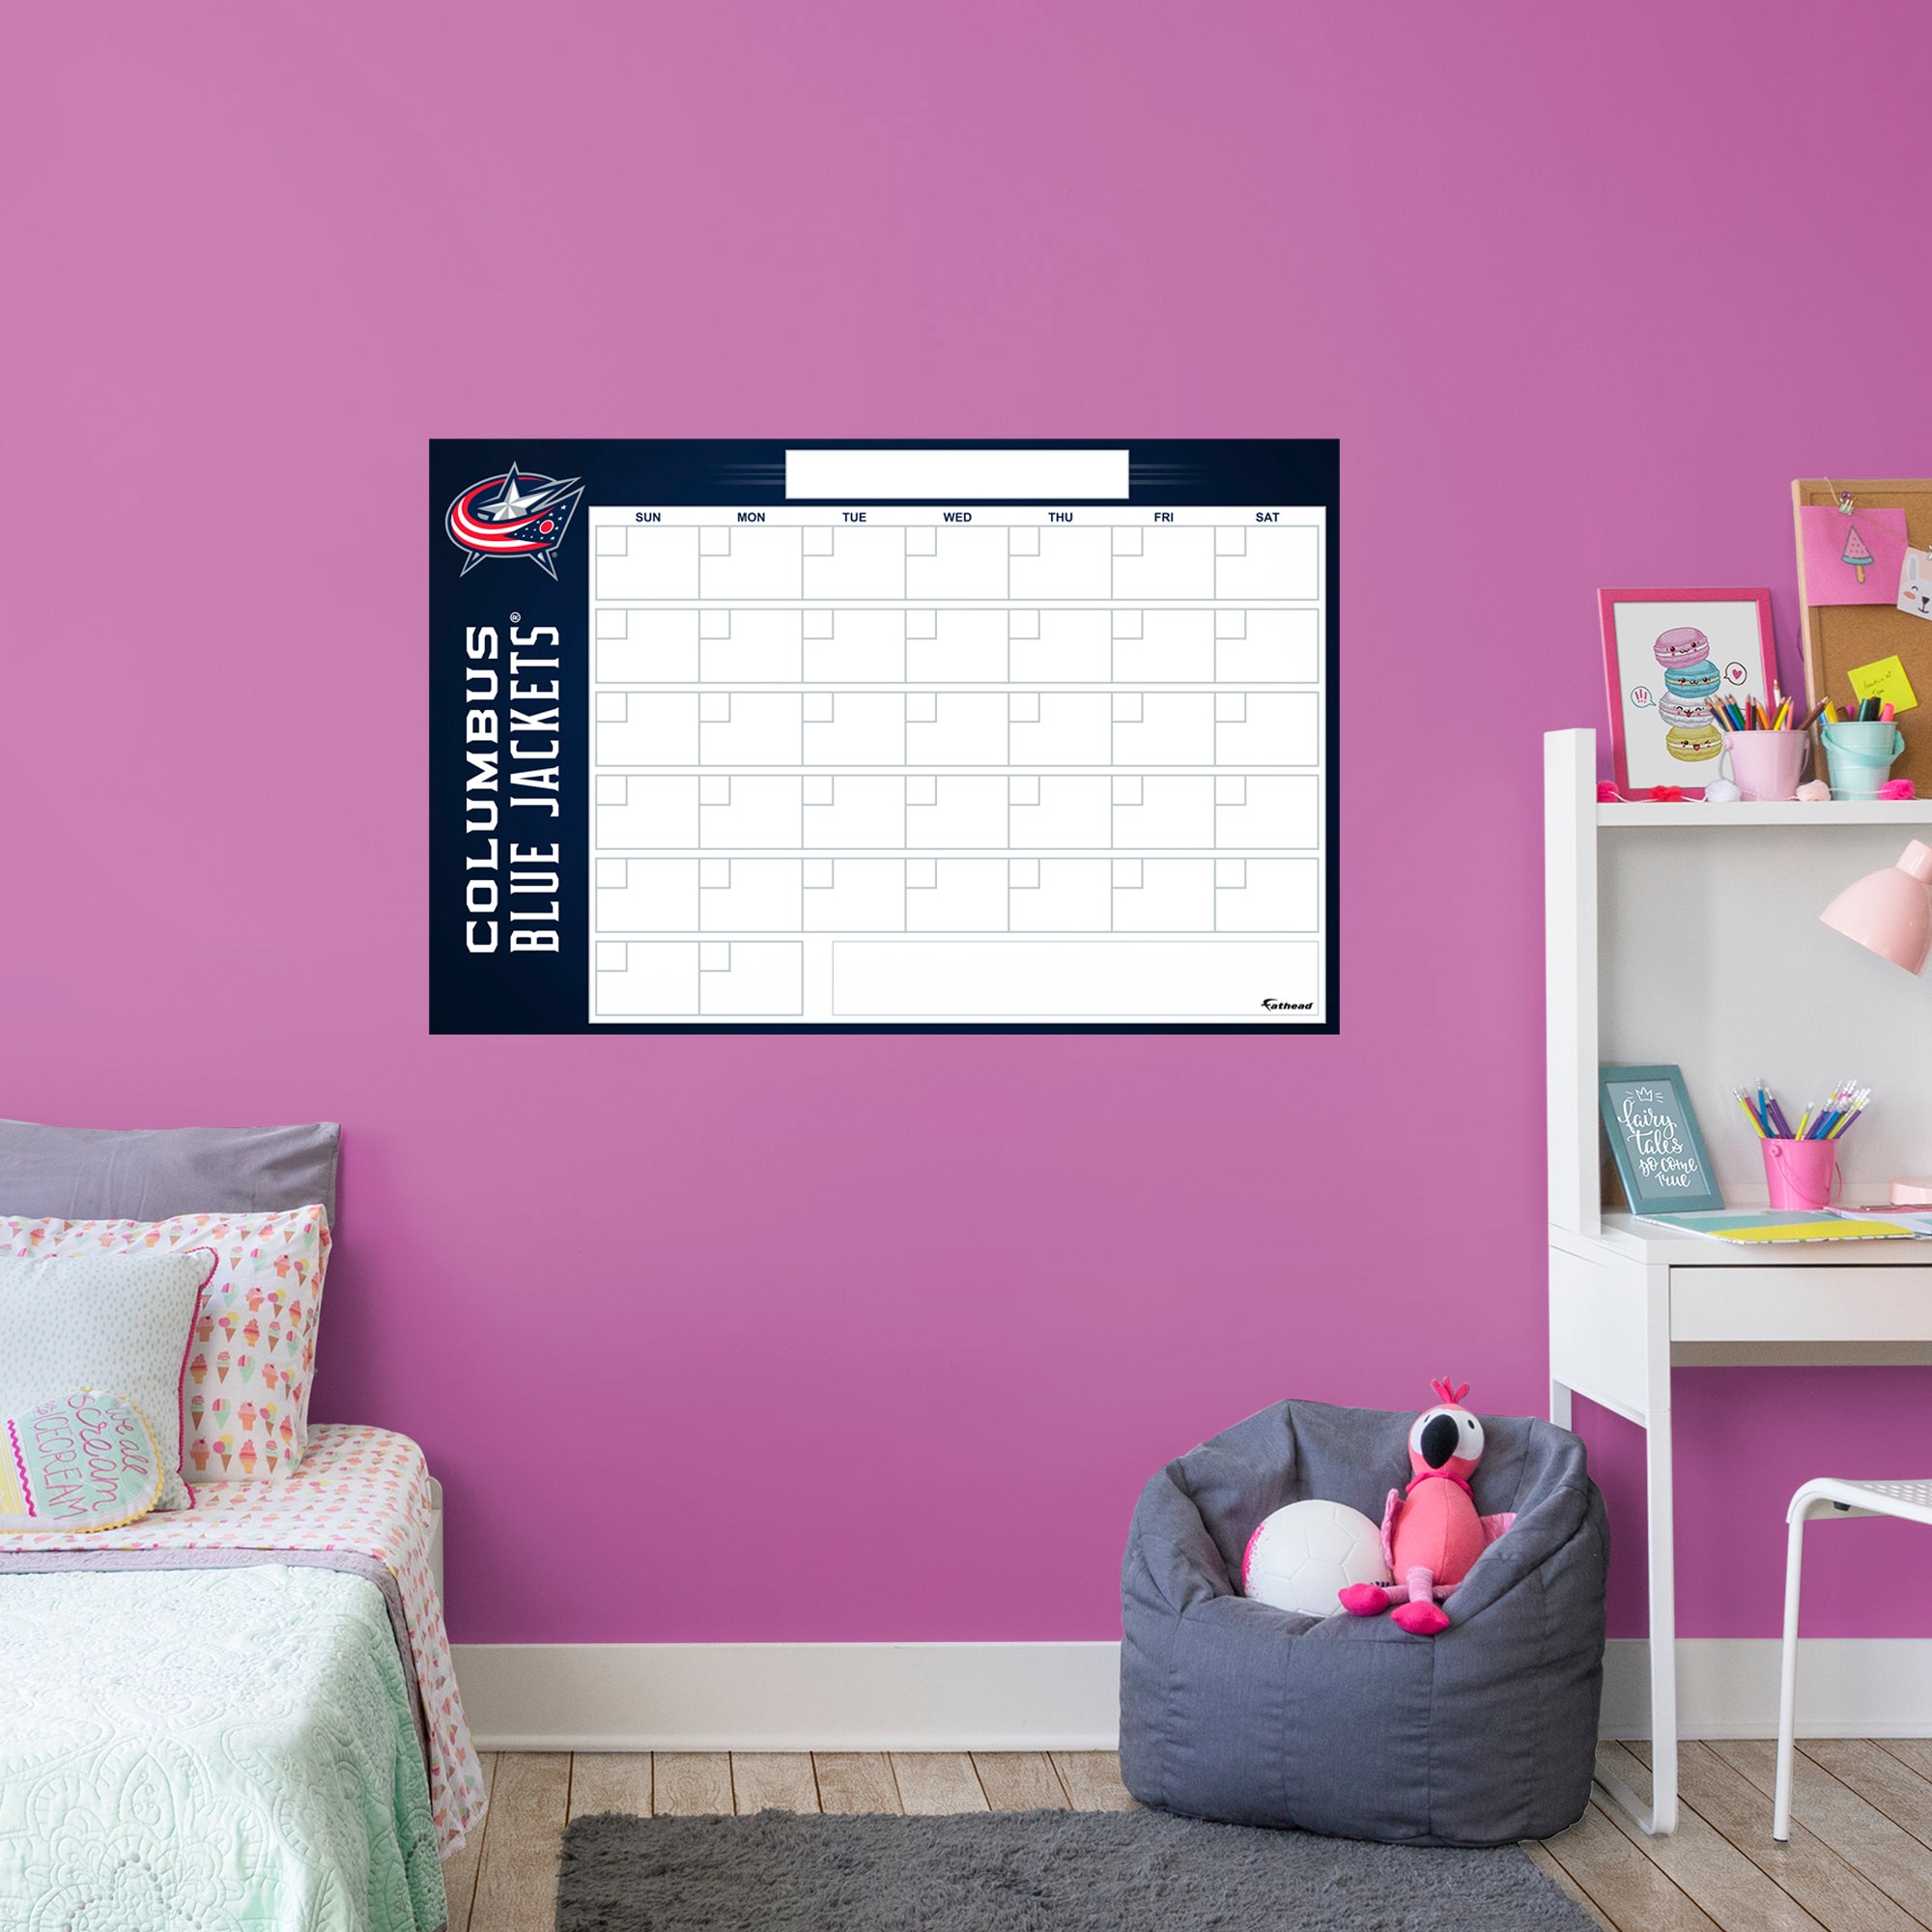 Columbus Blue Jackets Dry Erase Calendar - Officially Licensed NHL Removable Wall Decal Giant Decal (57"W x 34"H) by Fathead | V